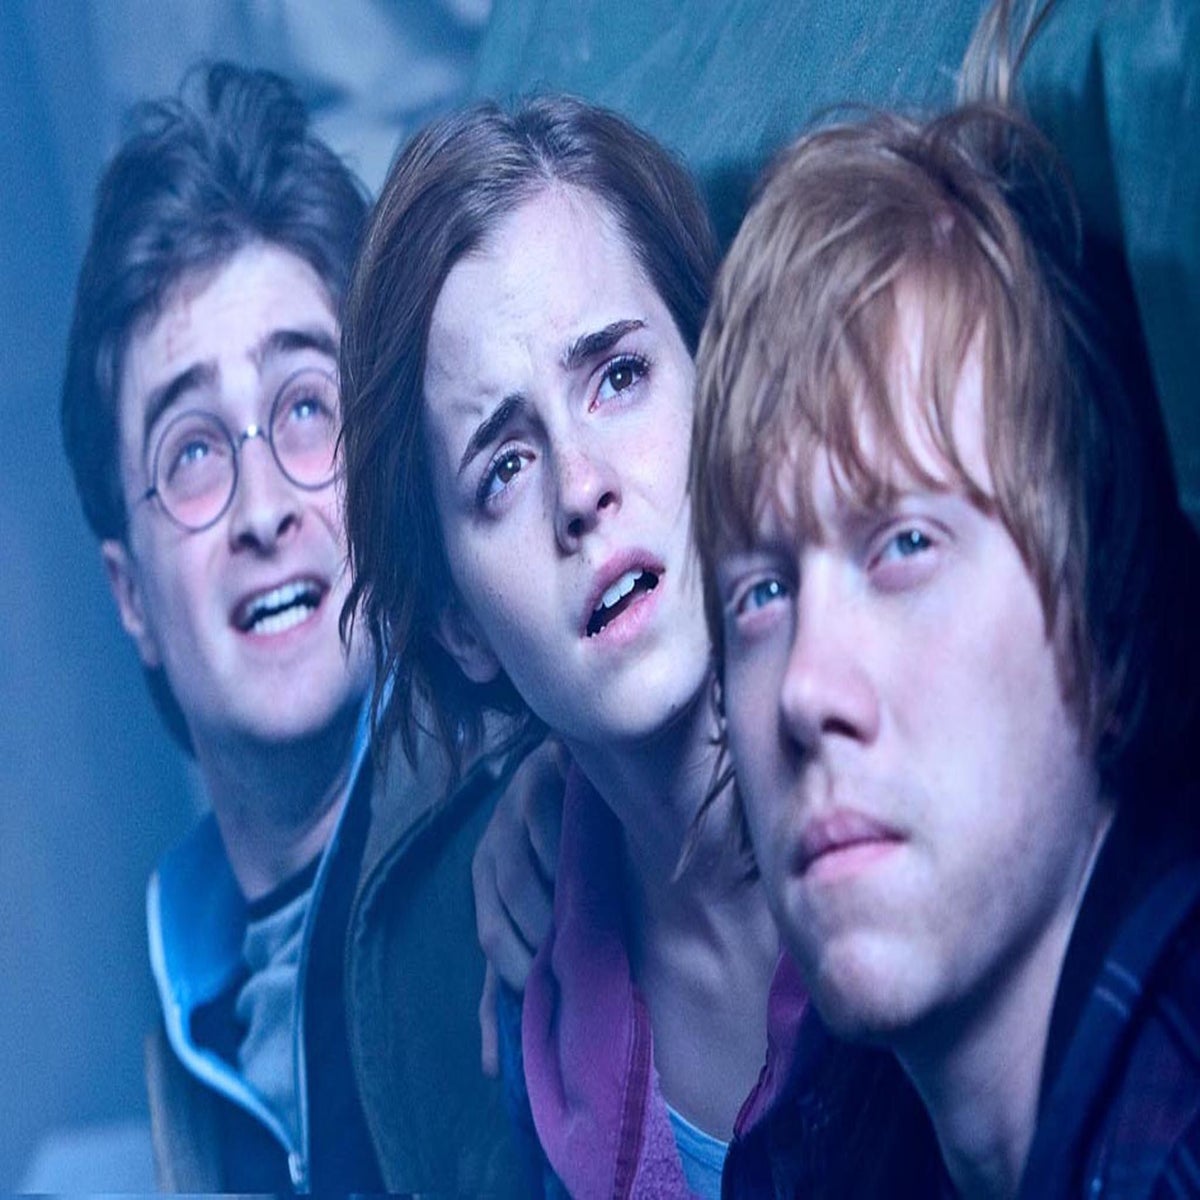 hermione granger and ron weasley kids